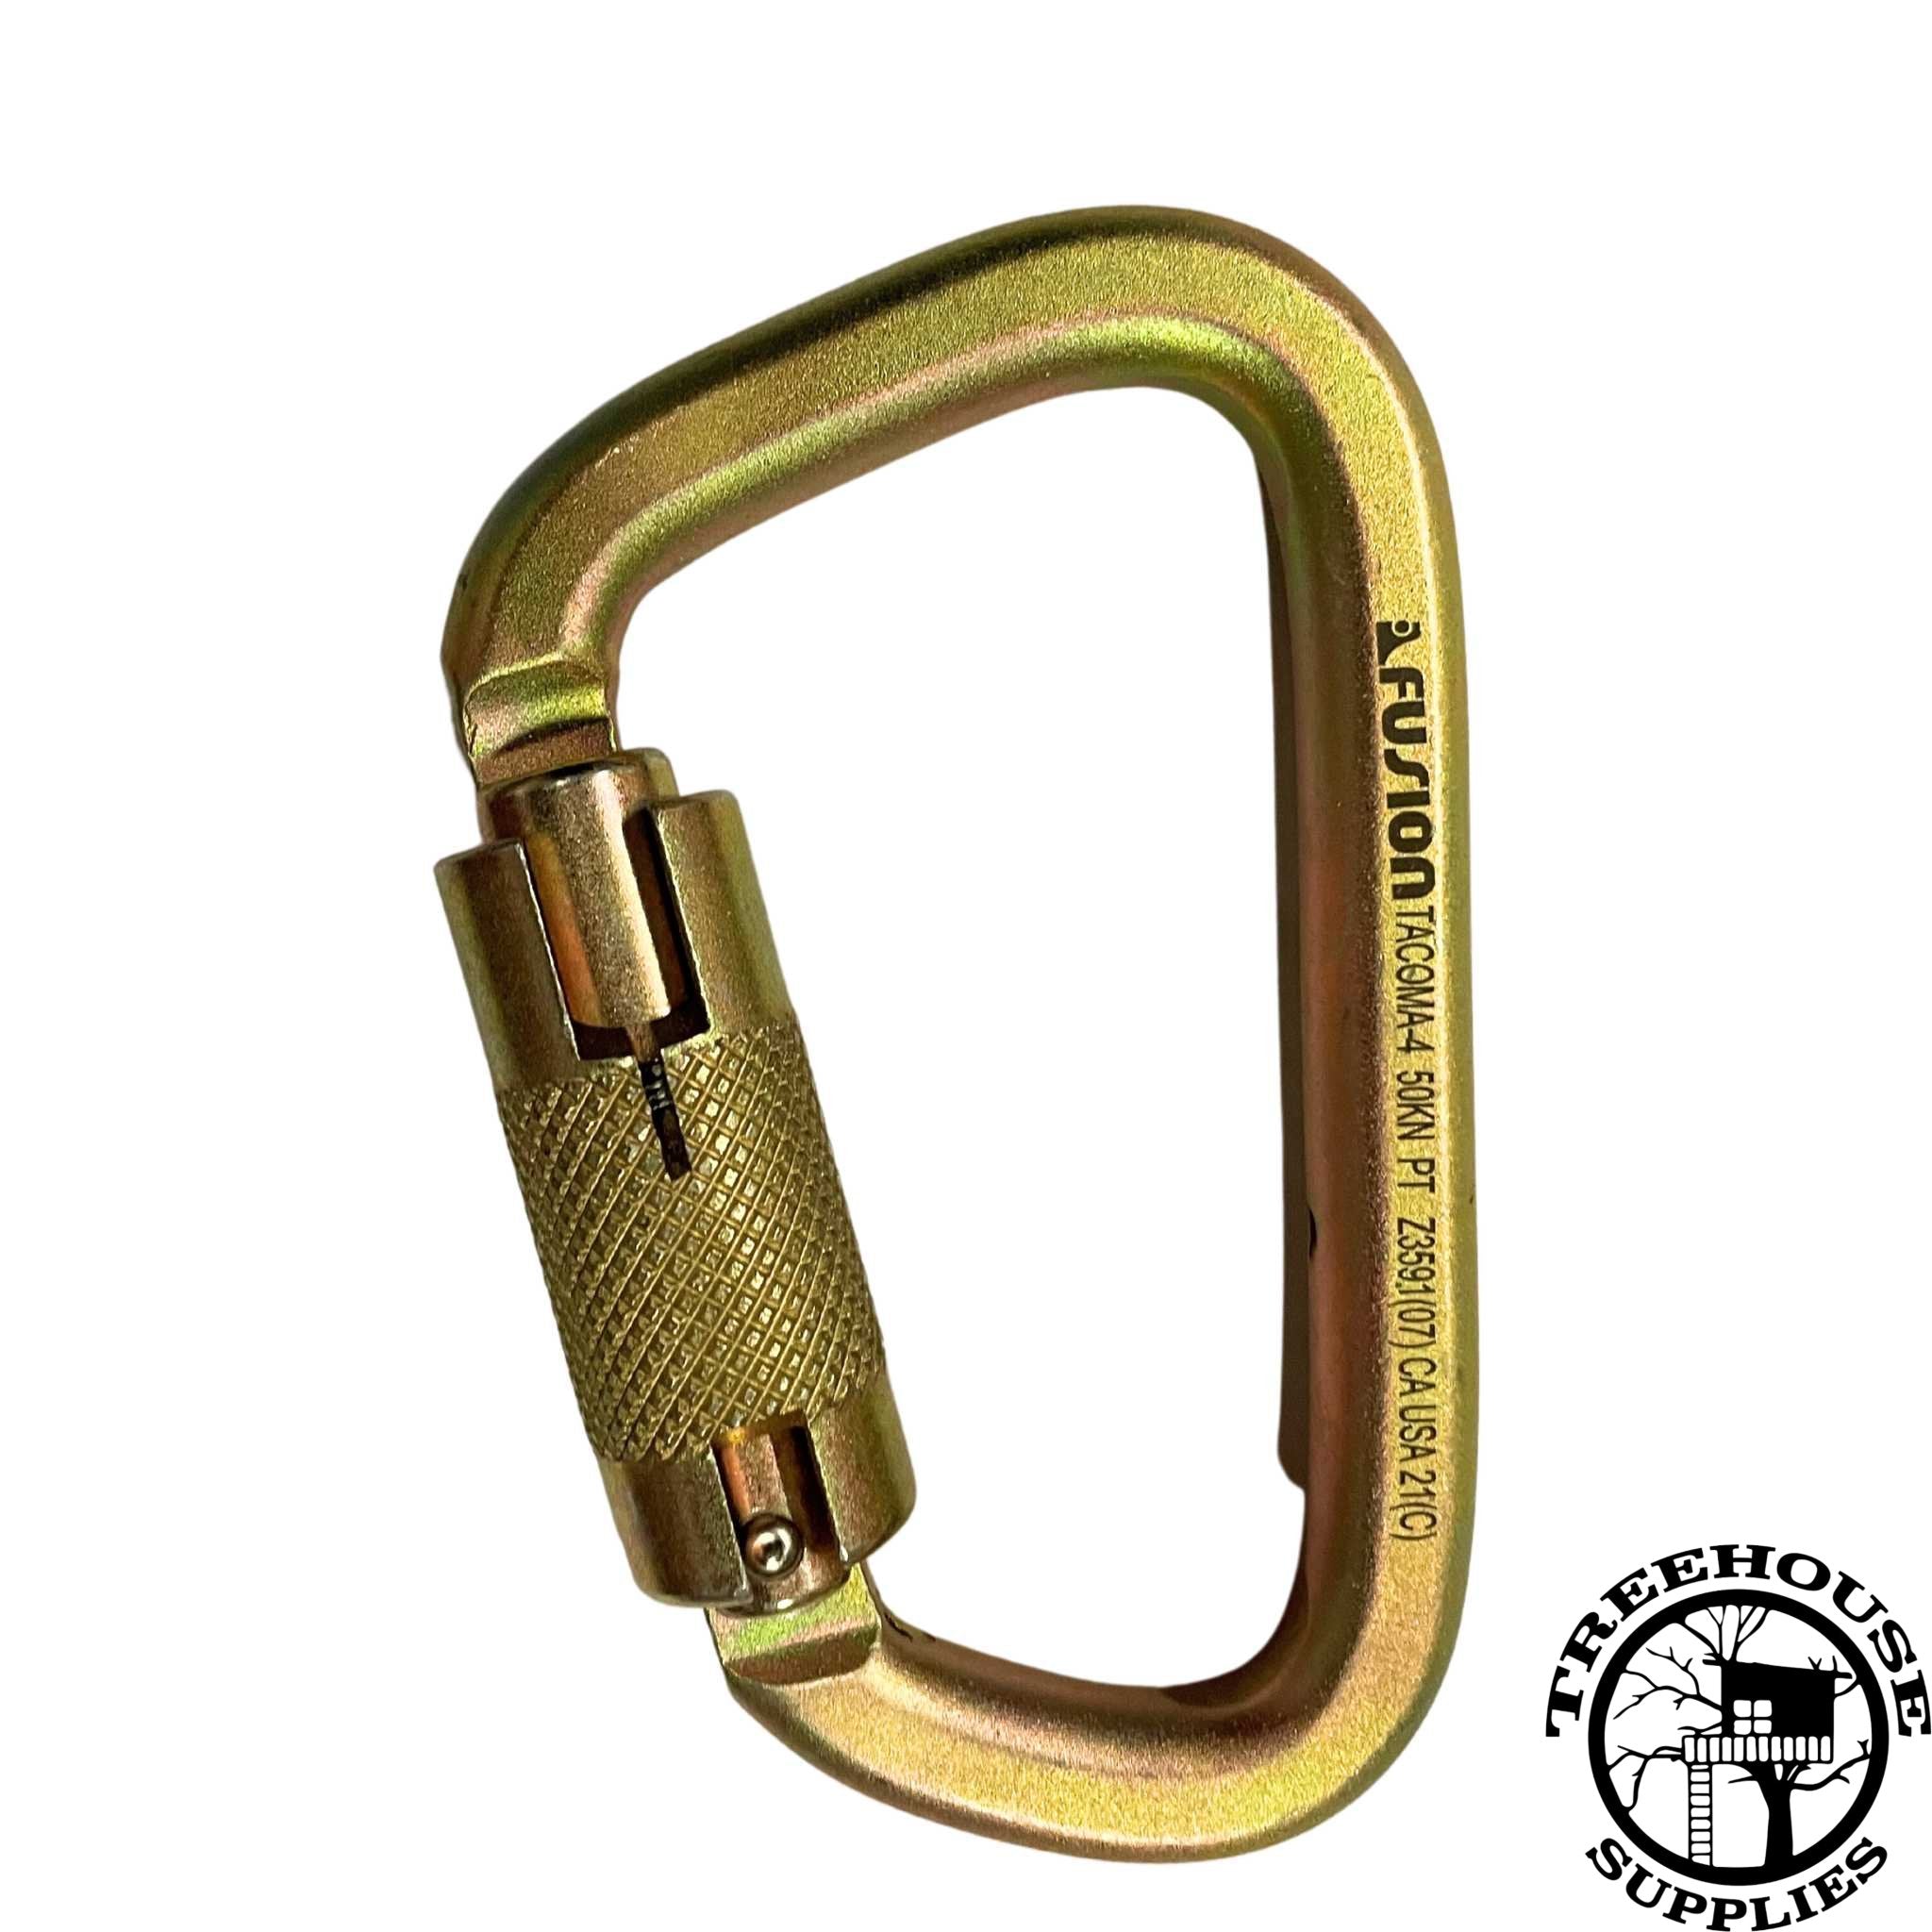 Close Up Image of Gold Steel D Quick lock Carabiner by Fusion. White Background